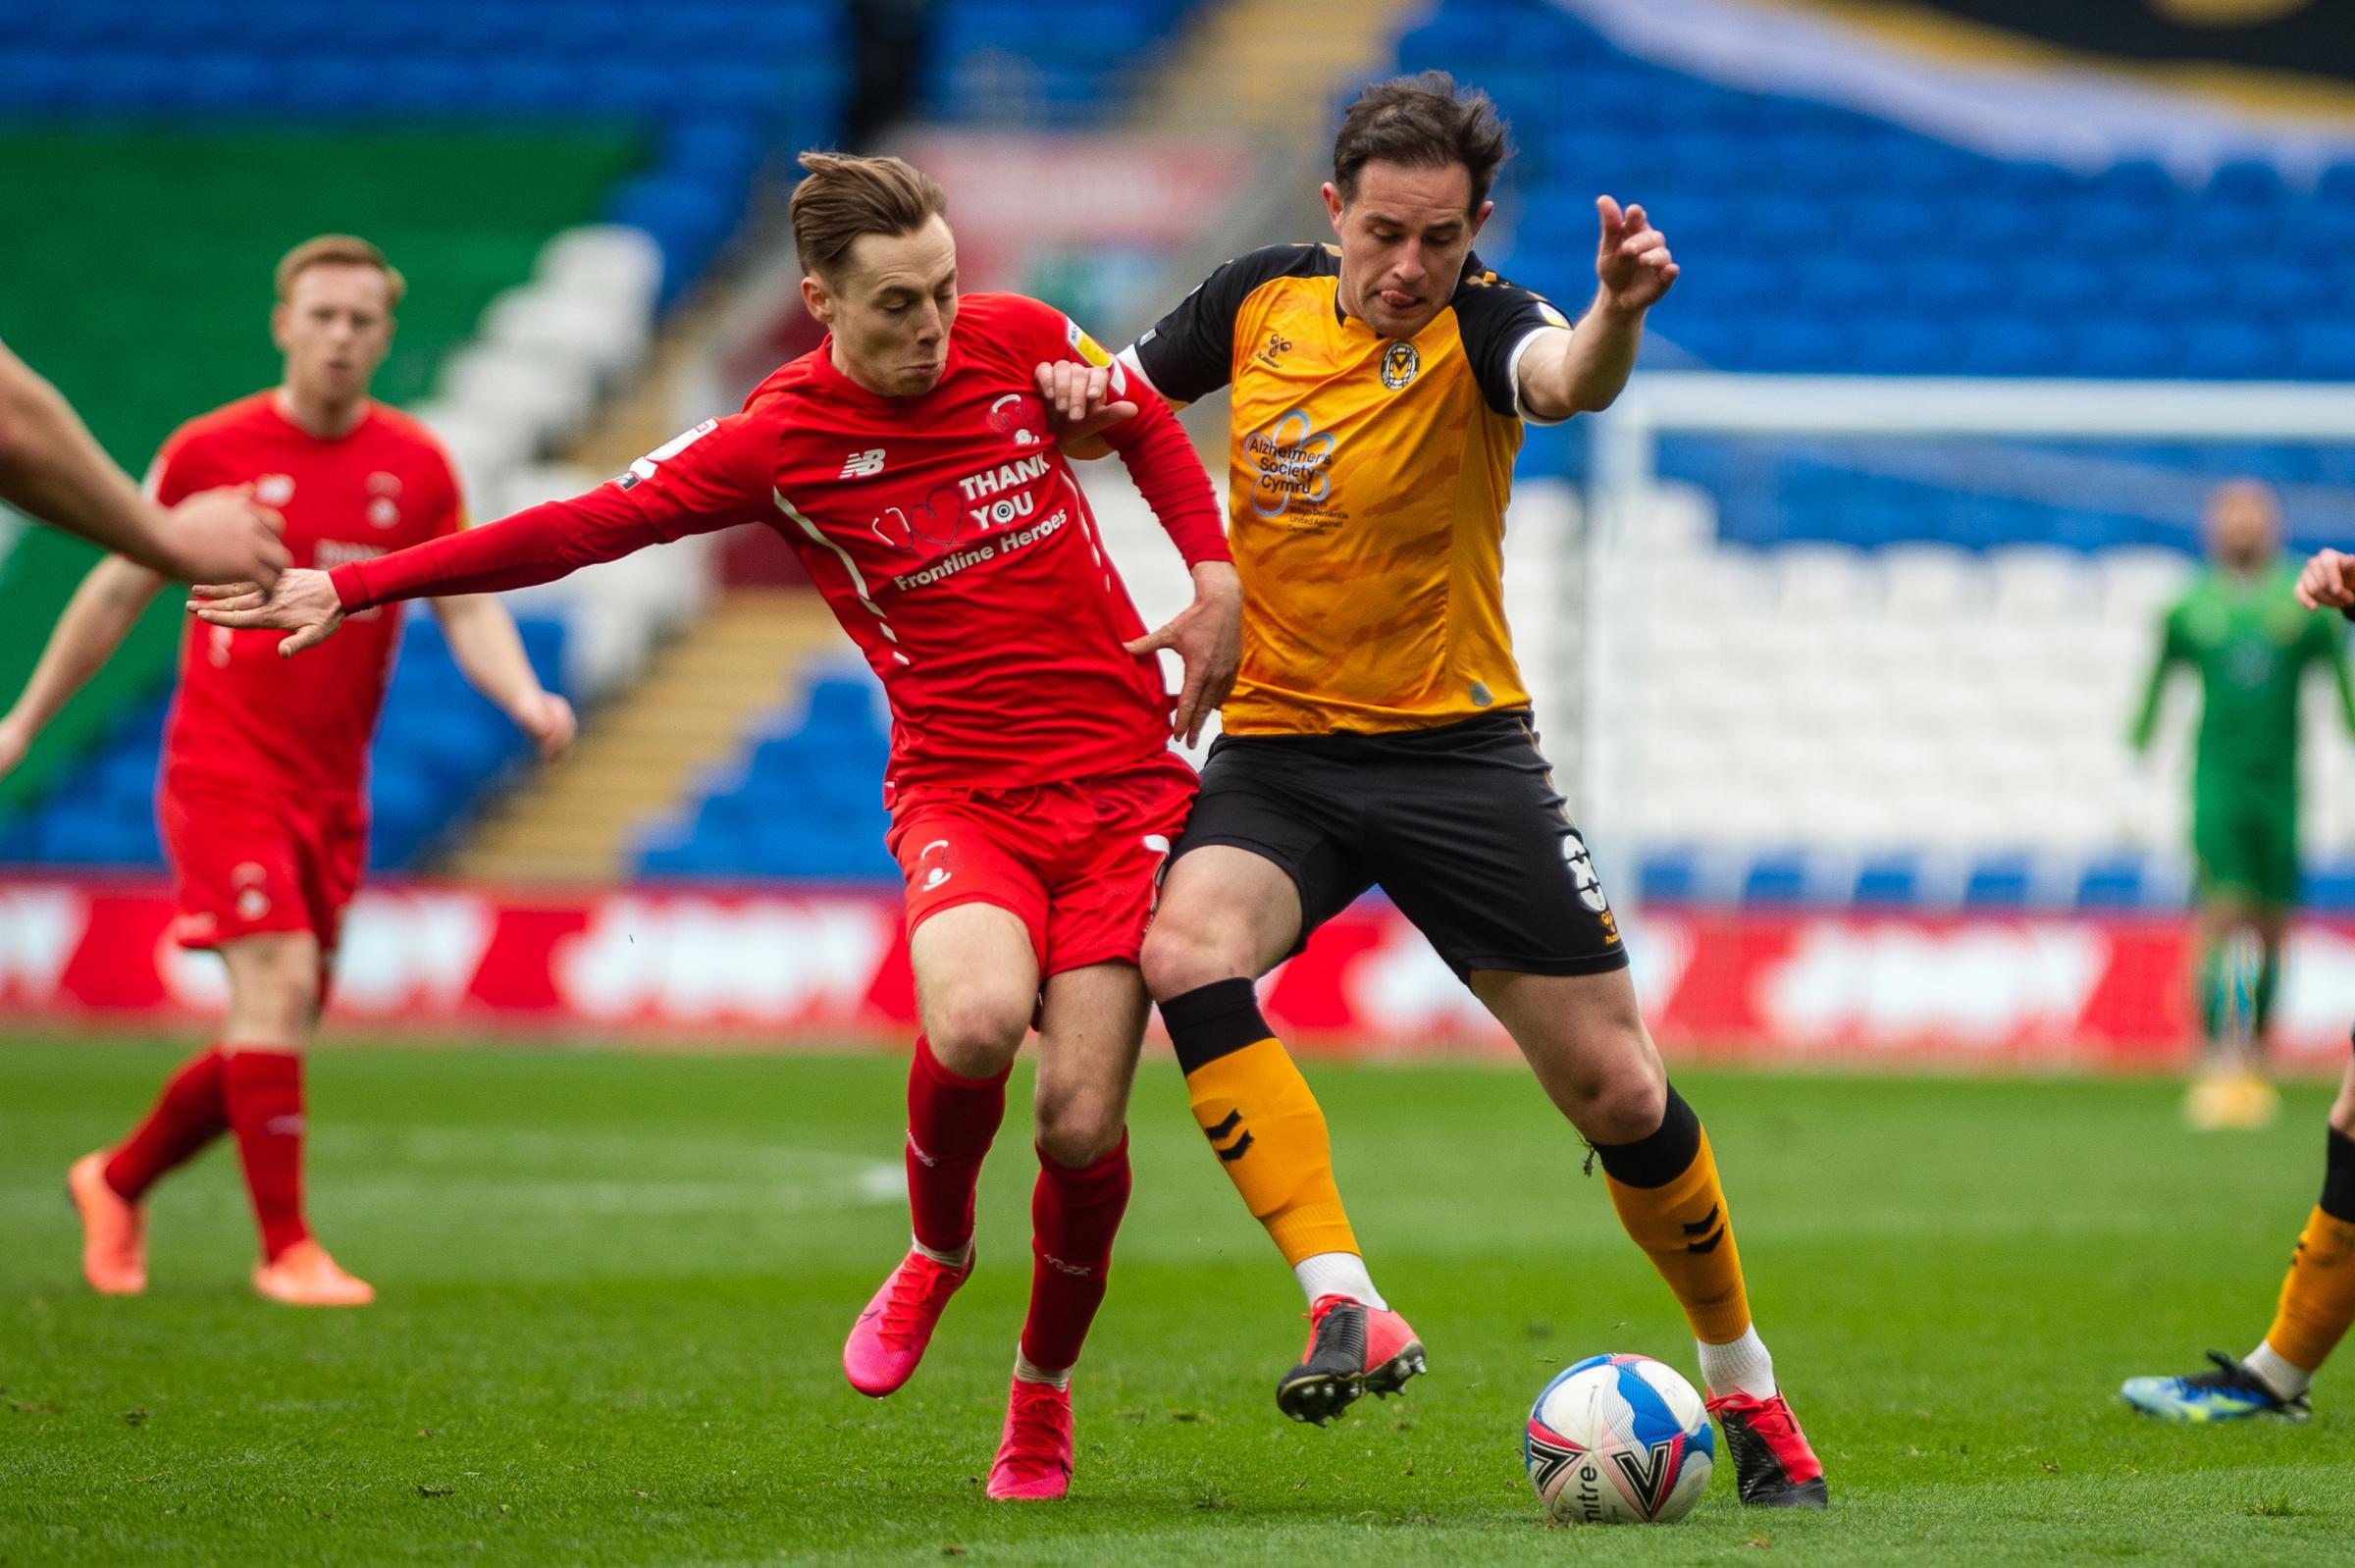 20.03.21 - Newport County v Leyton Orient - Sky Bet League 2 - Matthew Dolan of Newport County holds off Danny Johnson of Leyton Orient